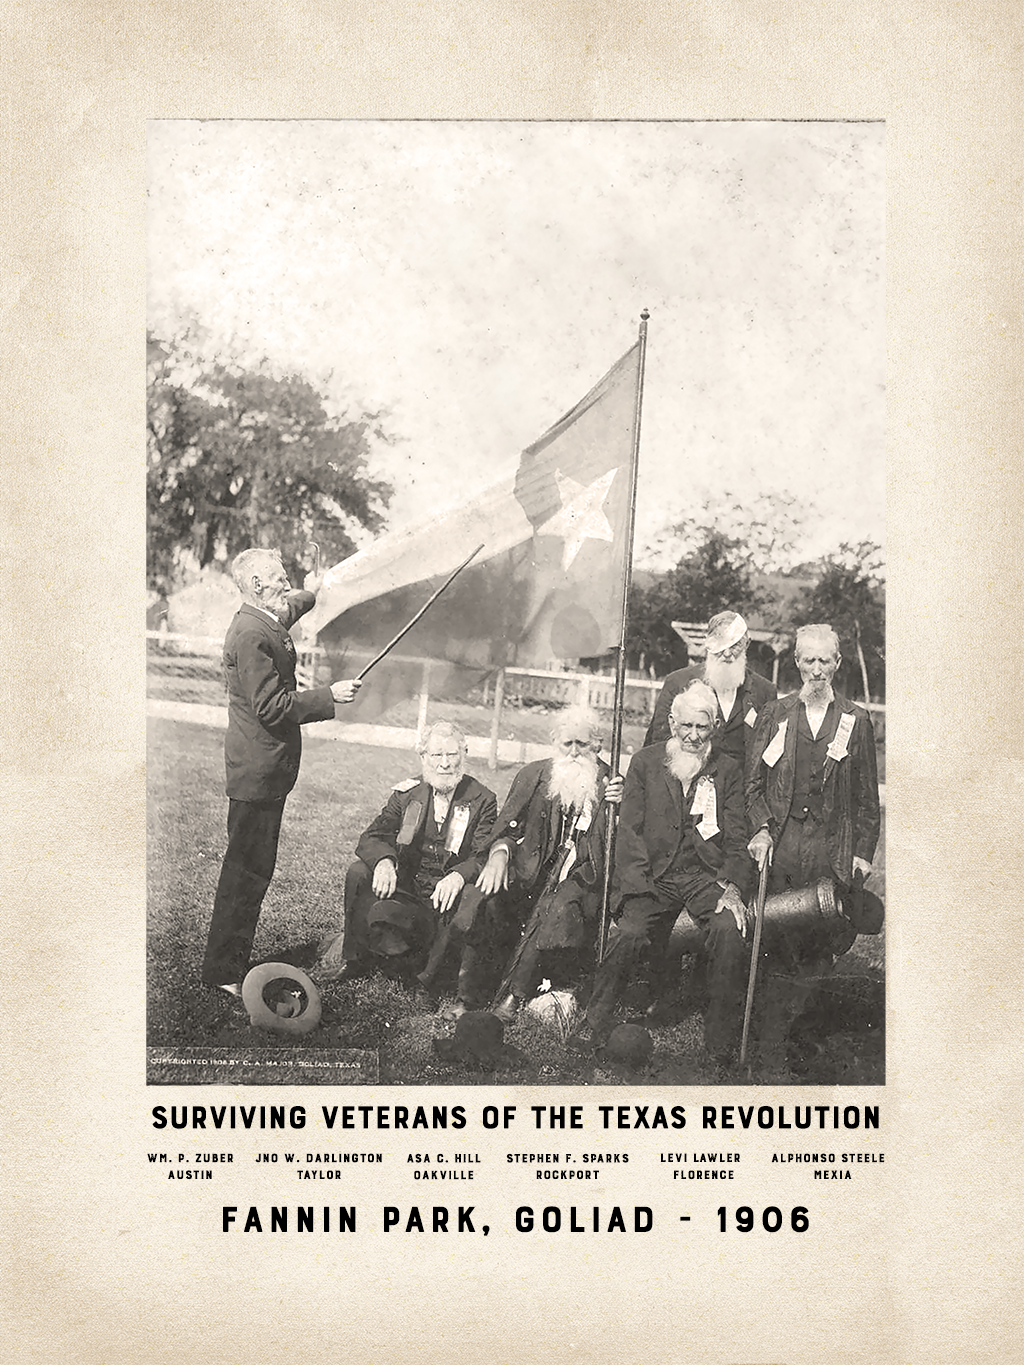 The Last Soldiers of the Republic of Texas